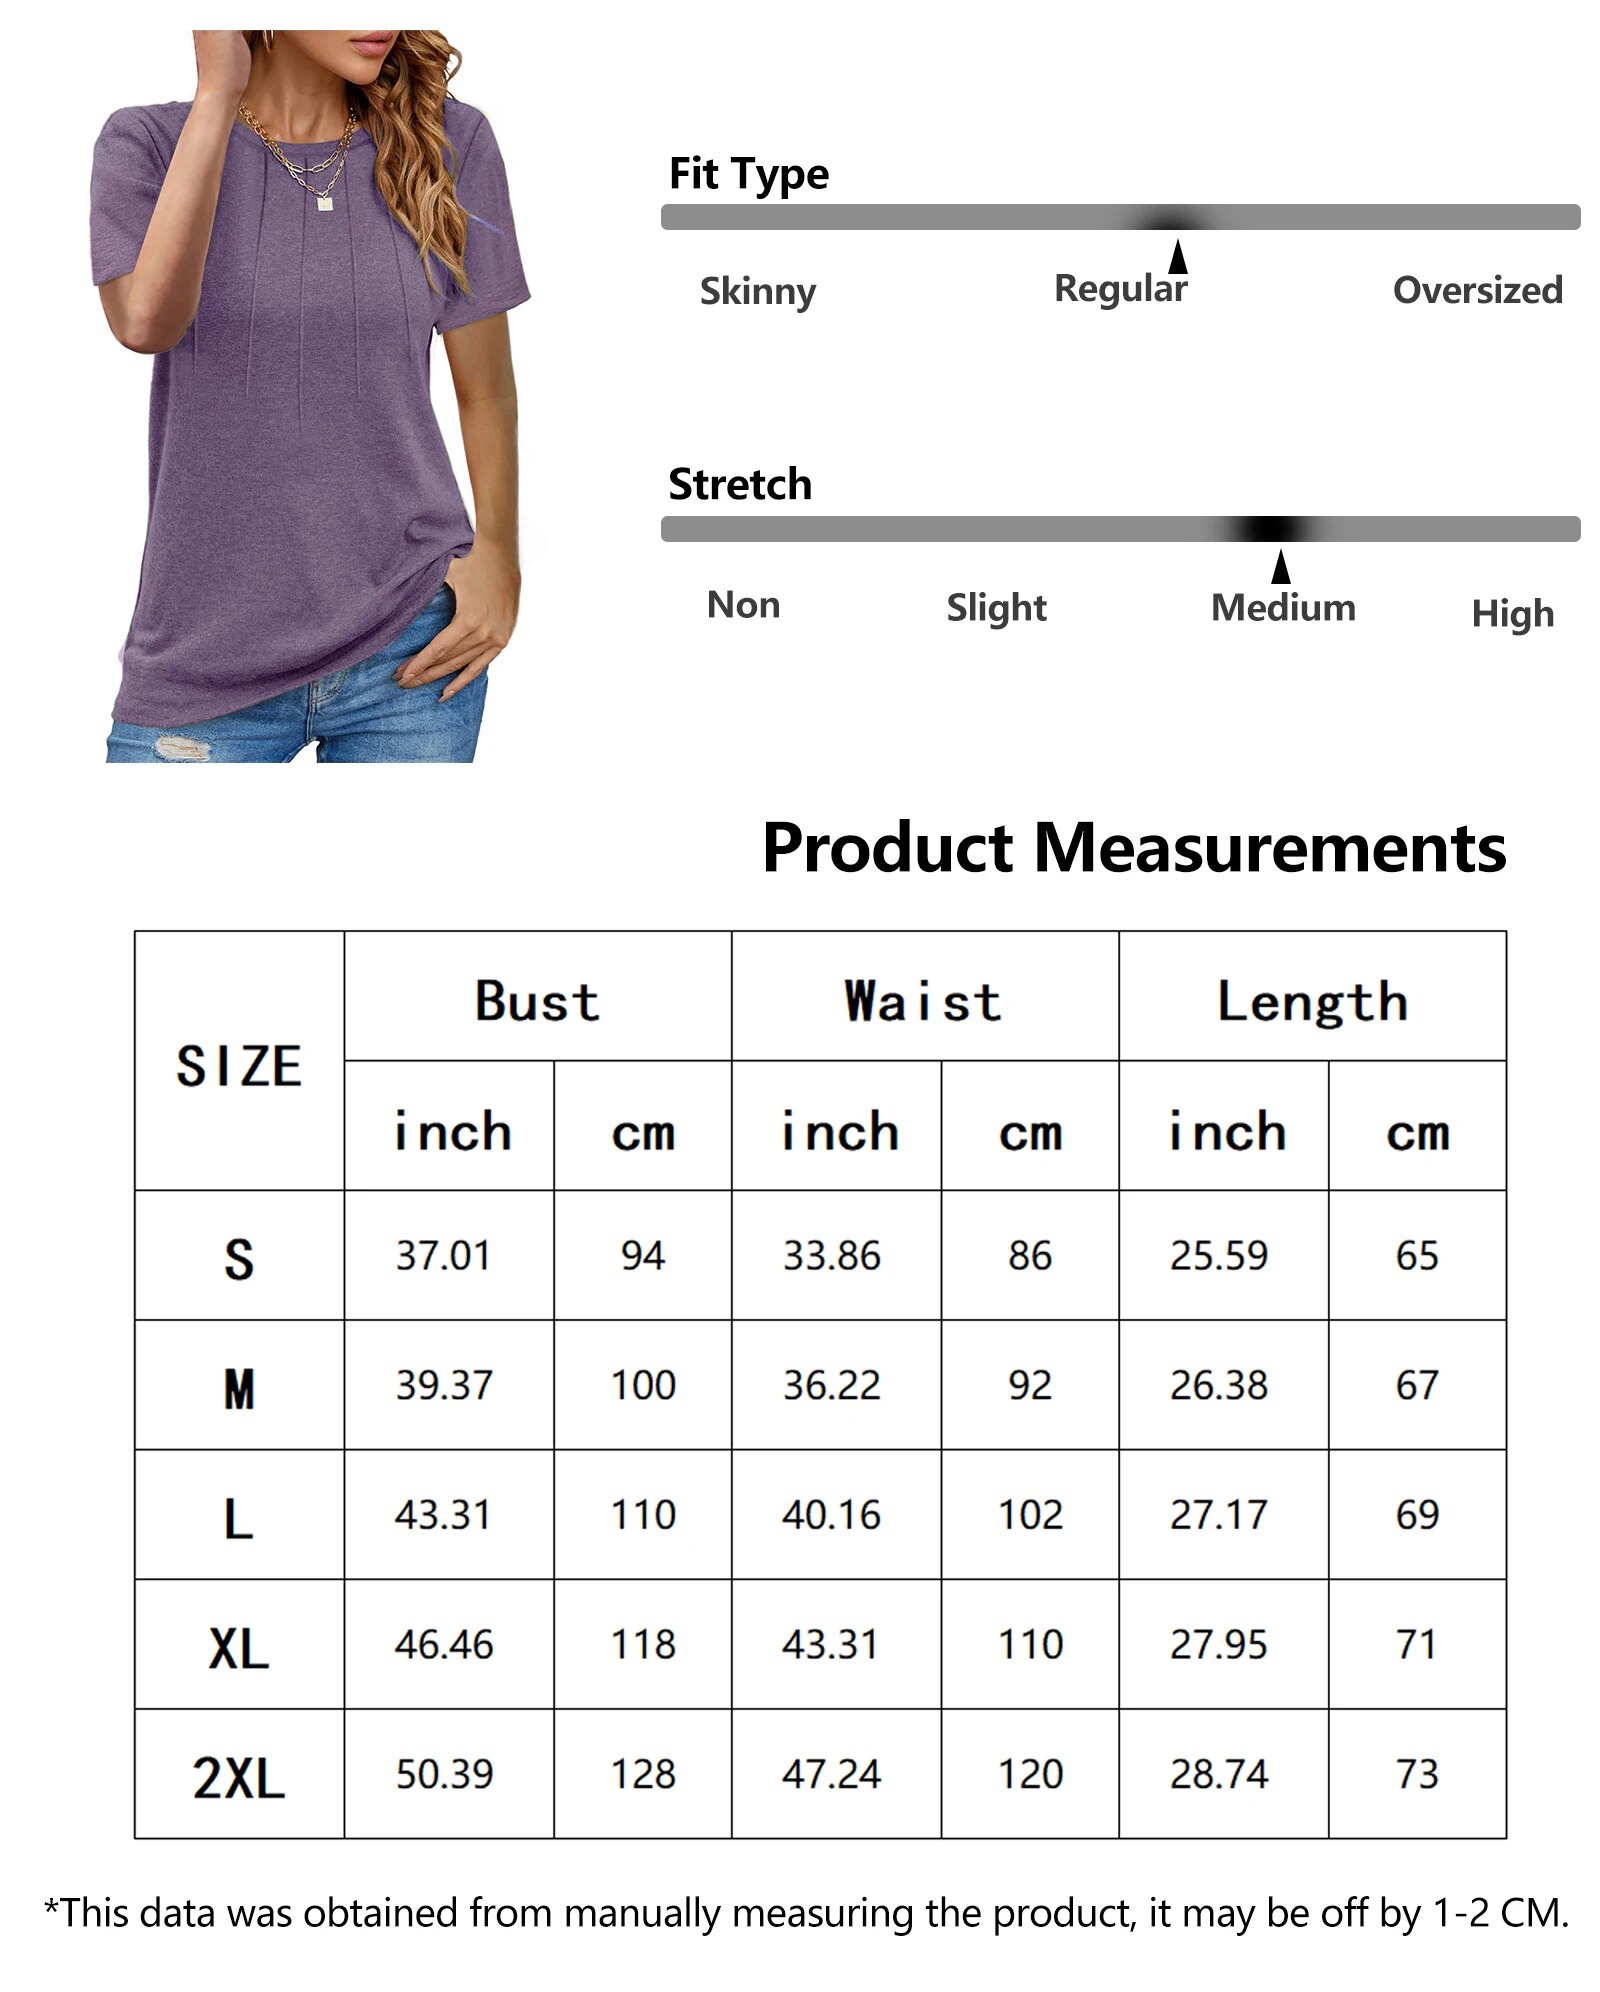 Rosvigor Blouses for Women Short Sleeve Shirts Casual Dressy Summer Tops with Pleats - image 5 of 5